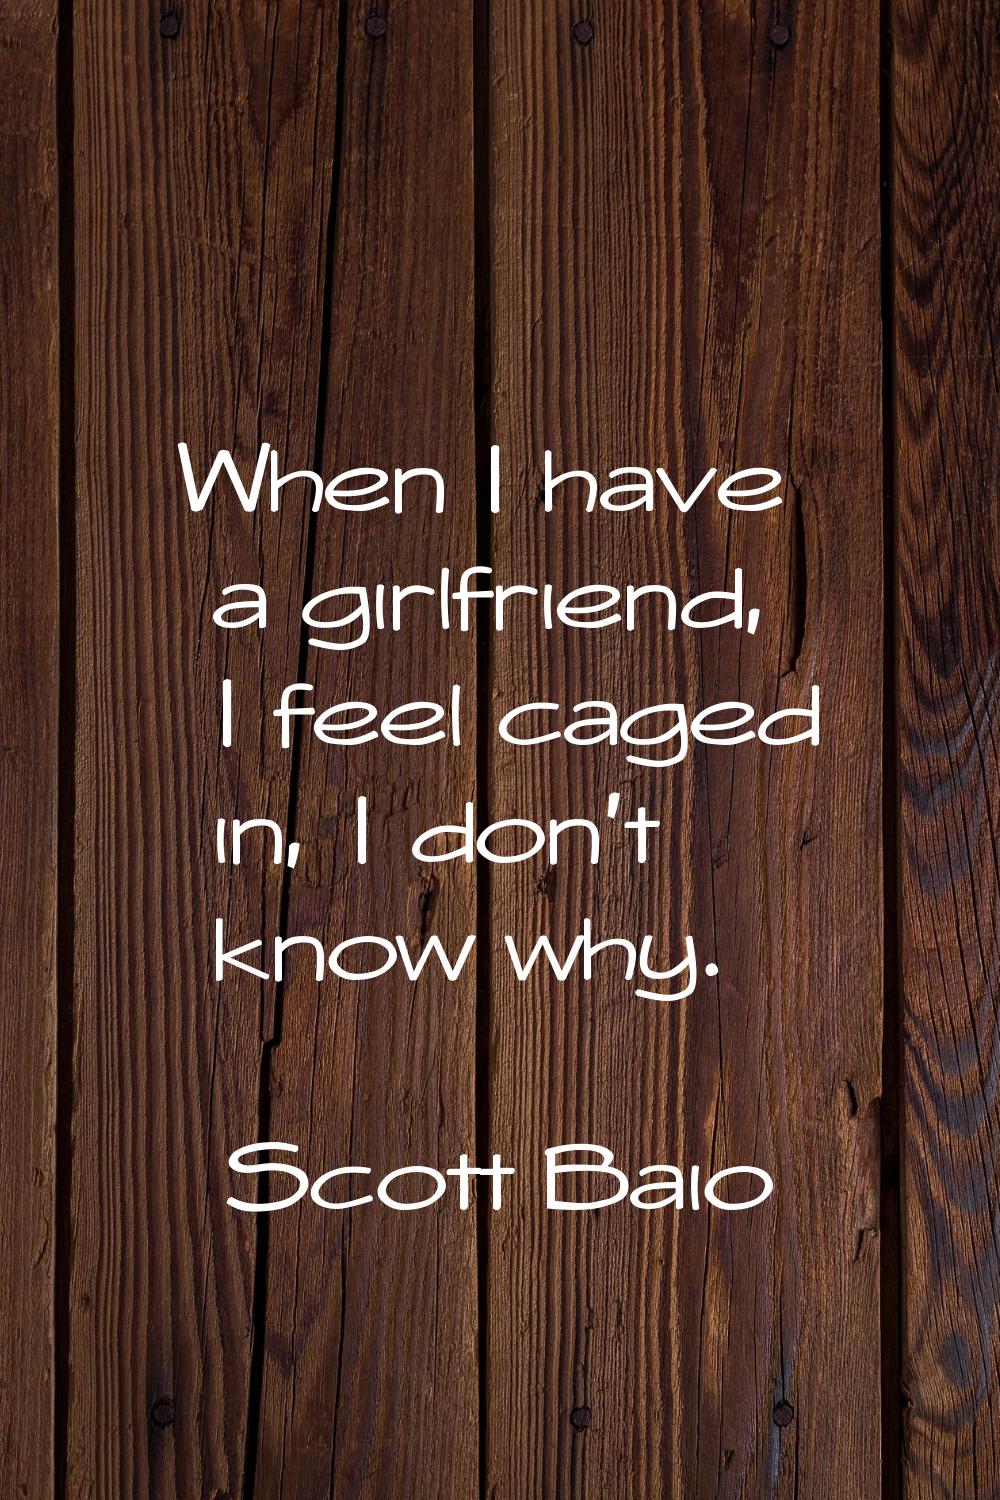 When I have a girlfriend, I feel caged in, I don't know why.